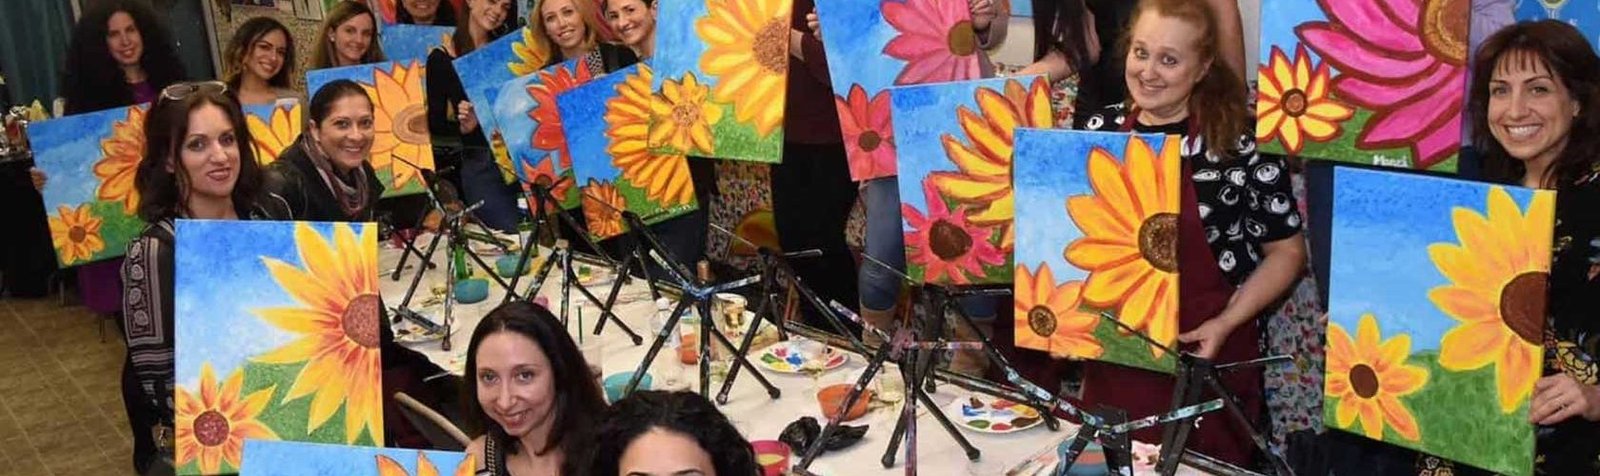 host a paint and sip party